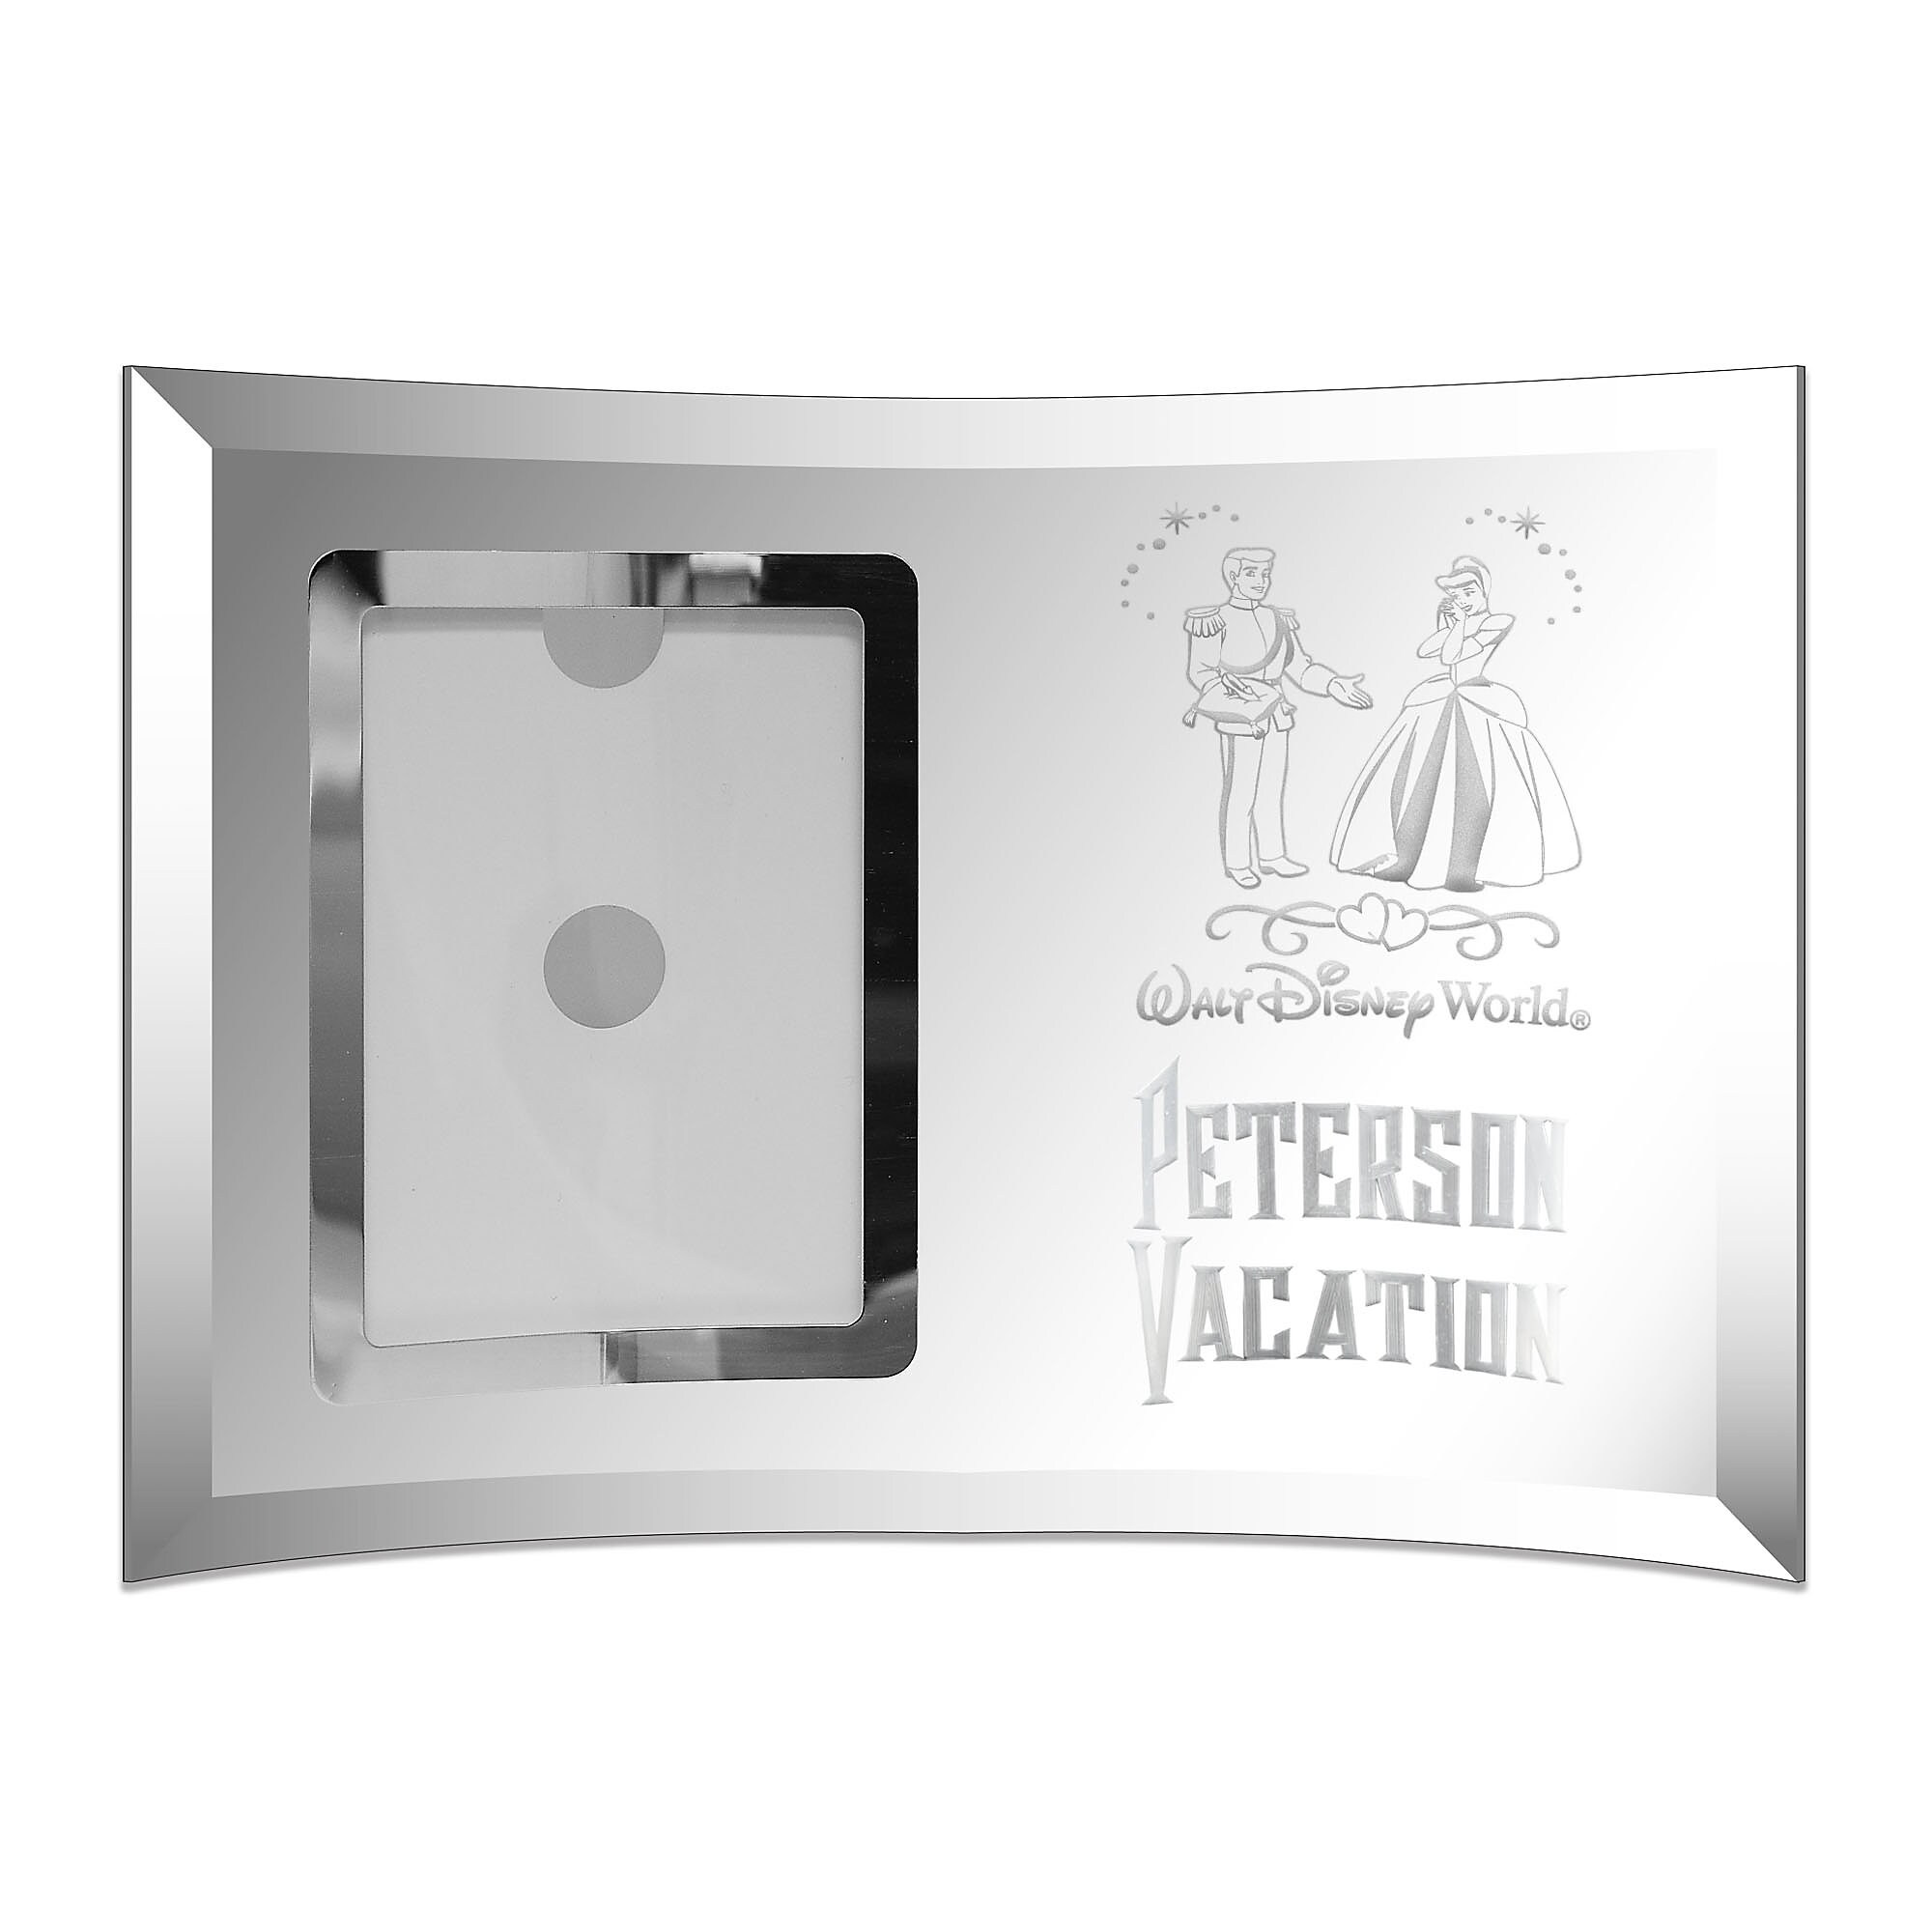 Cinderella and Prince Charming Glass Frame by Arribas - Personalizable